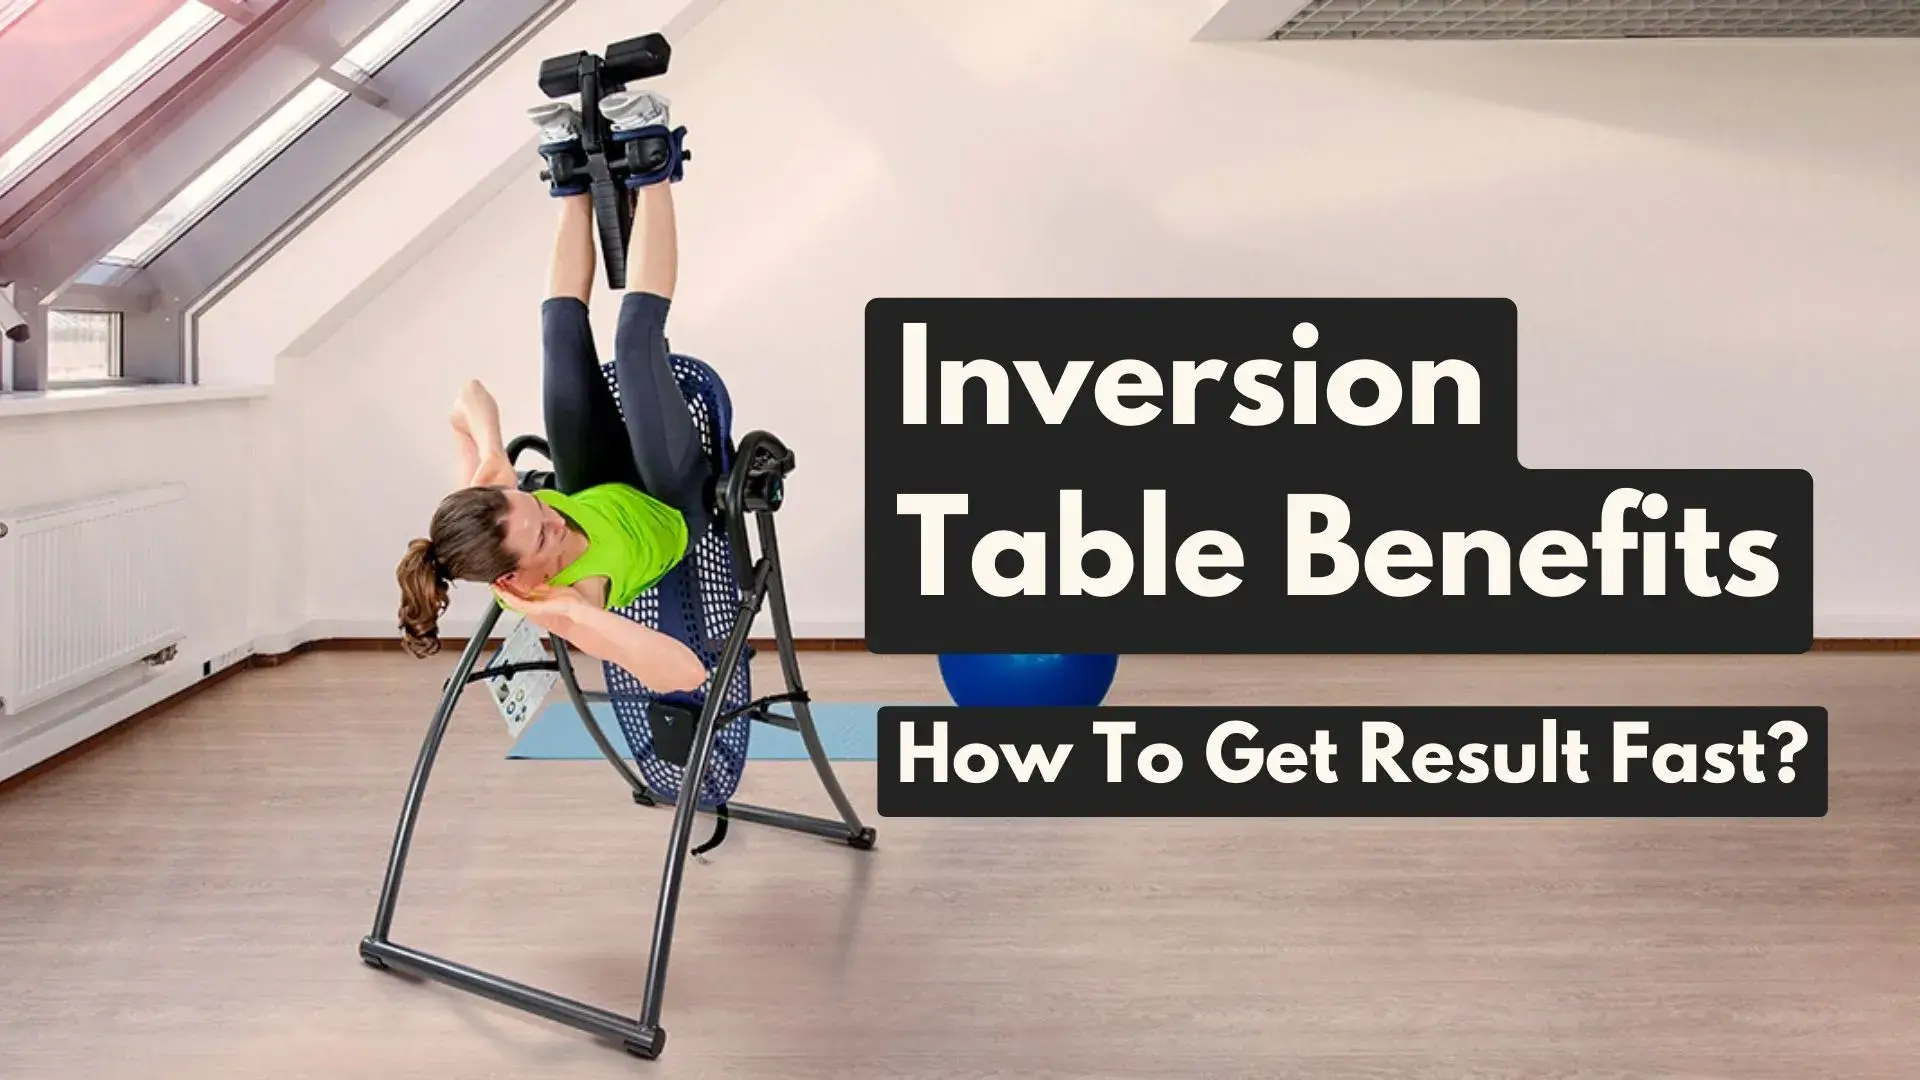 Benefits of Inversion Tables | Inversion Table Benefits - by Inversiontablehub.com